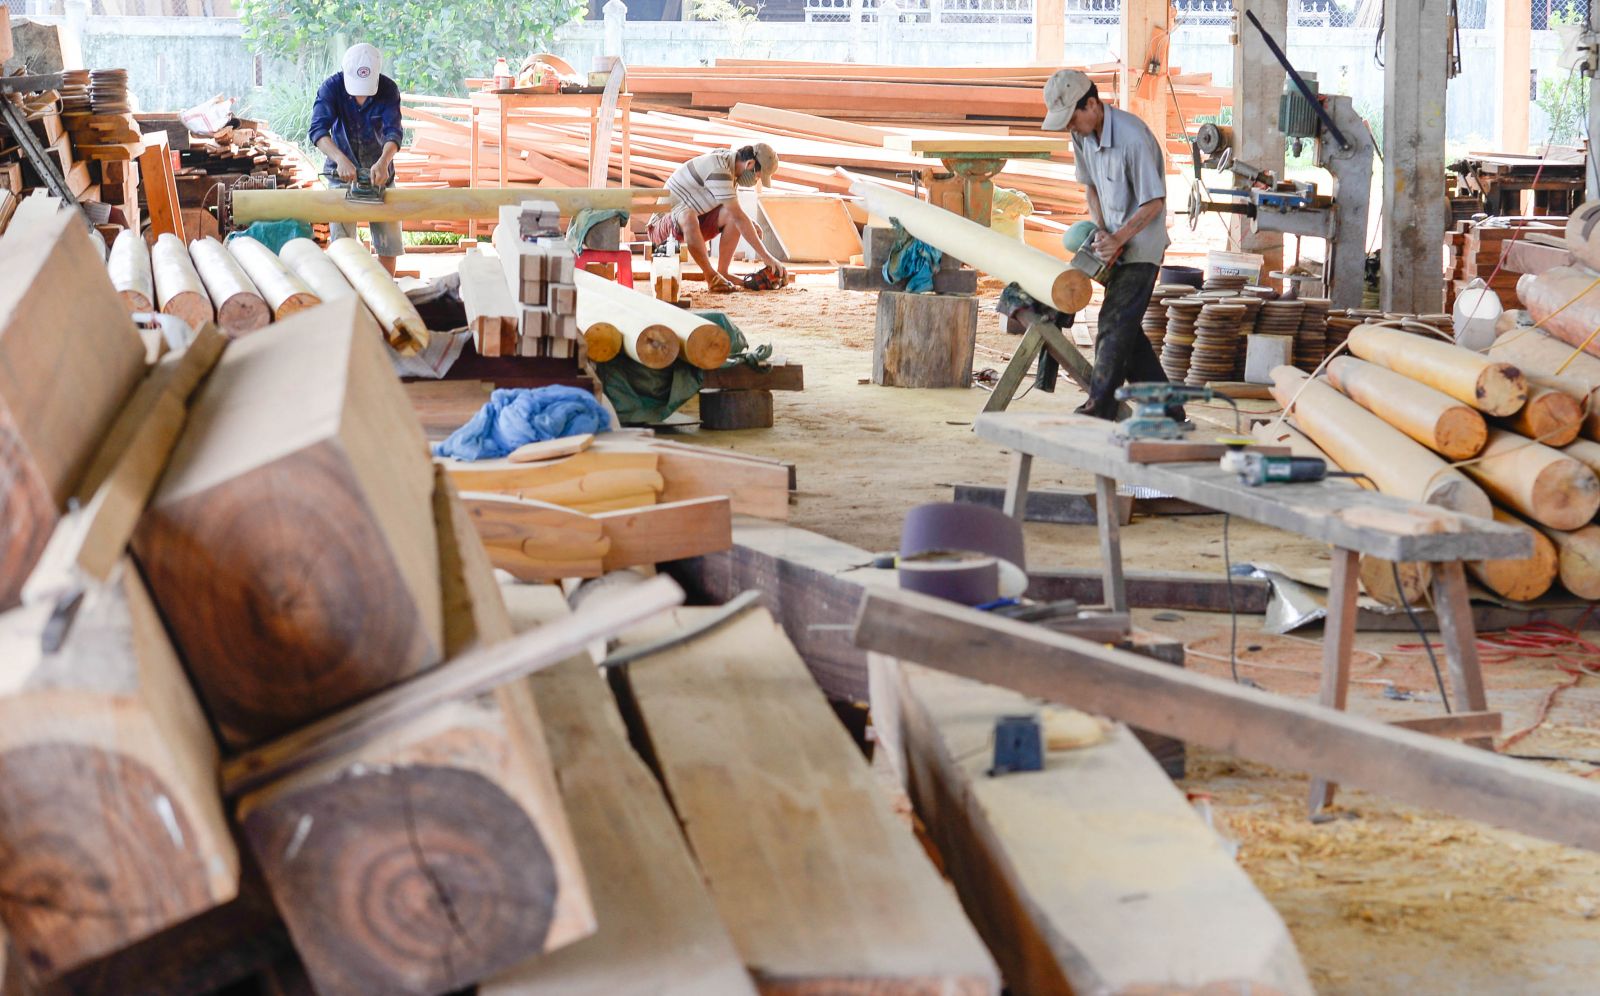 Materials are prepared at the sawmill before turning into products